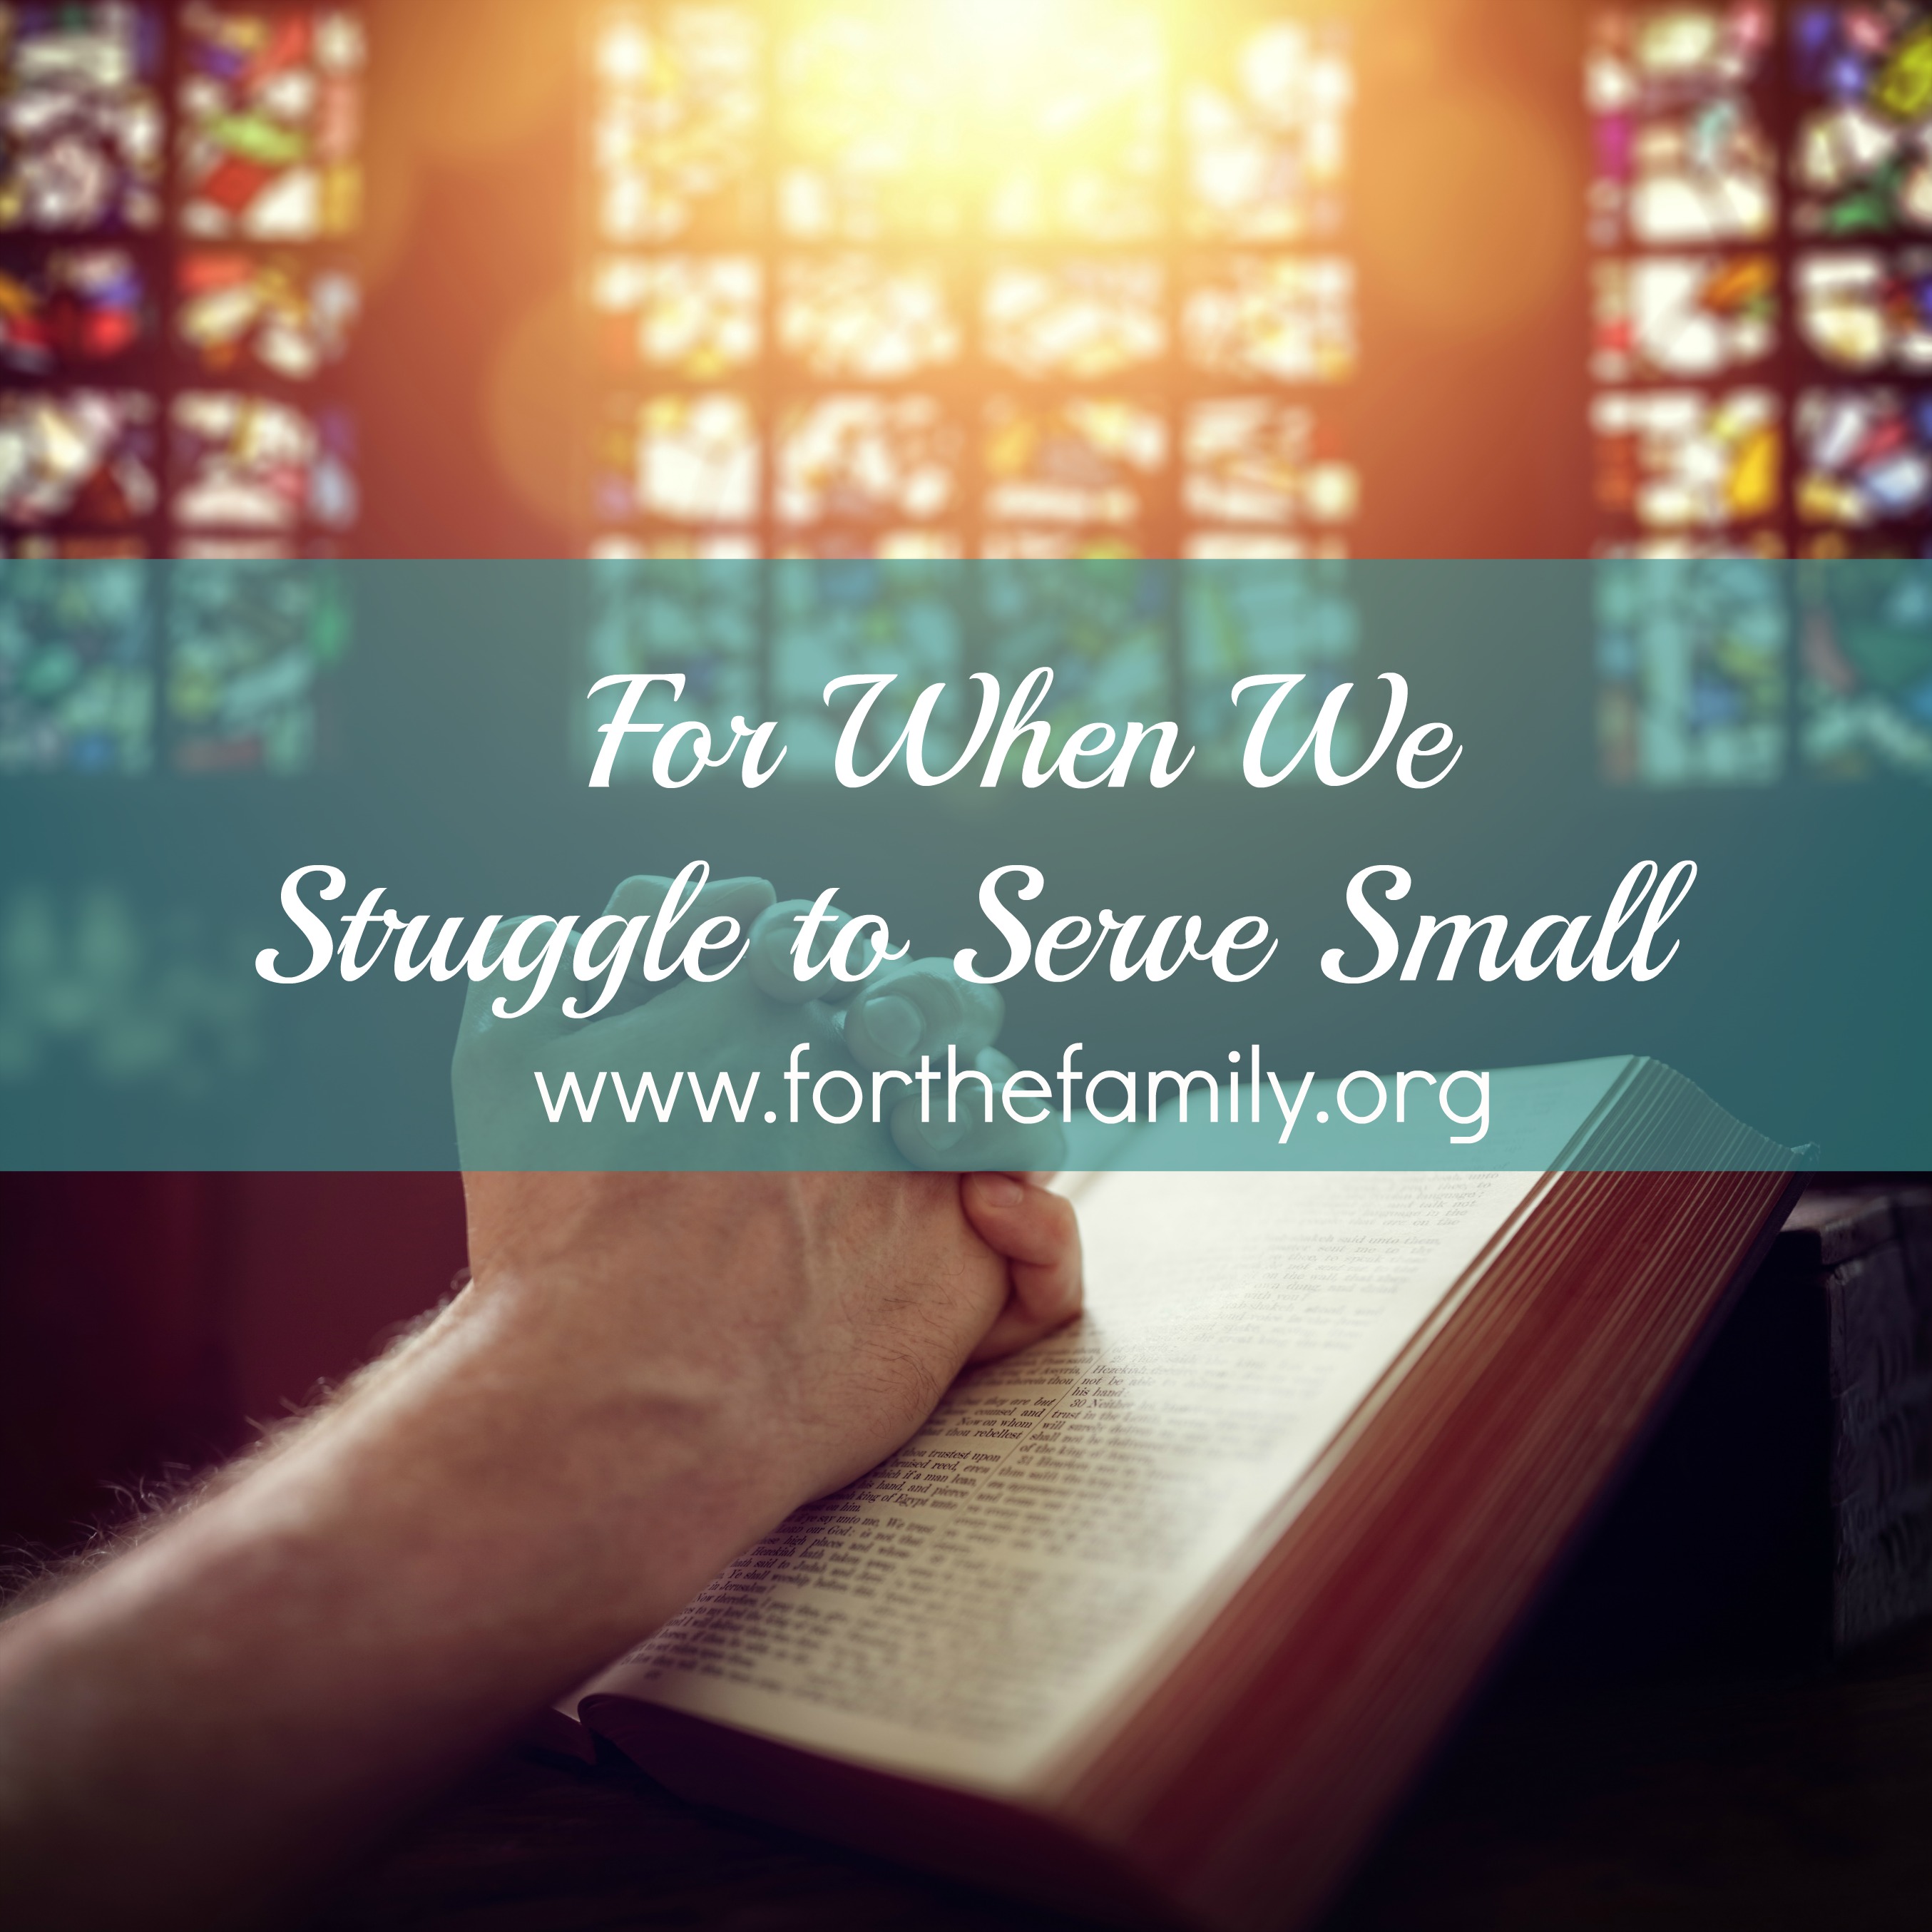 For When We Struggle to Serve Small